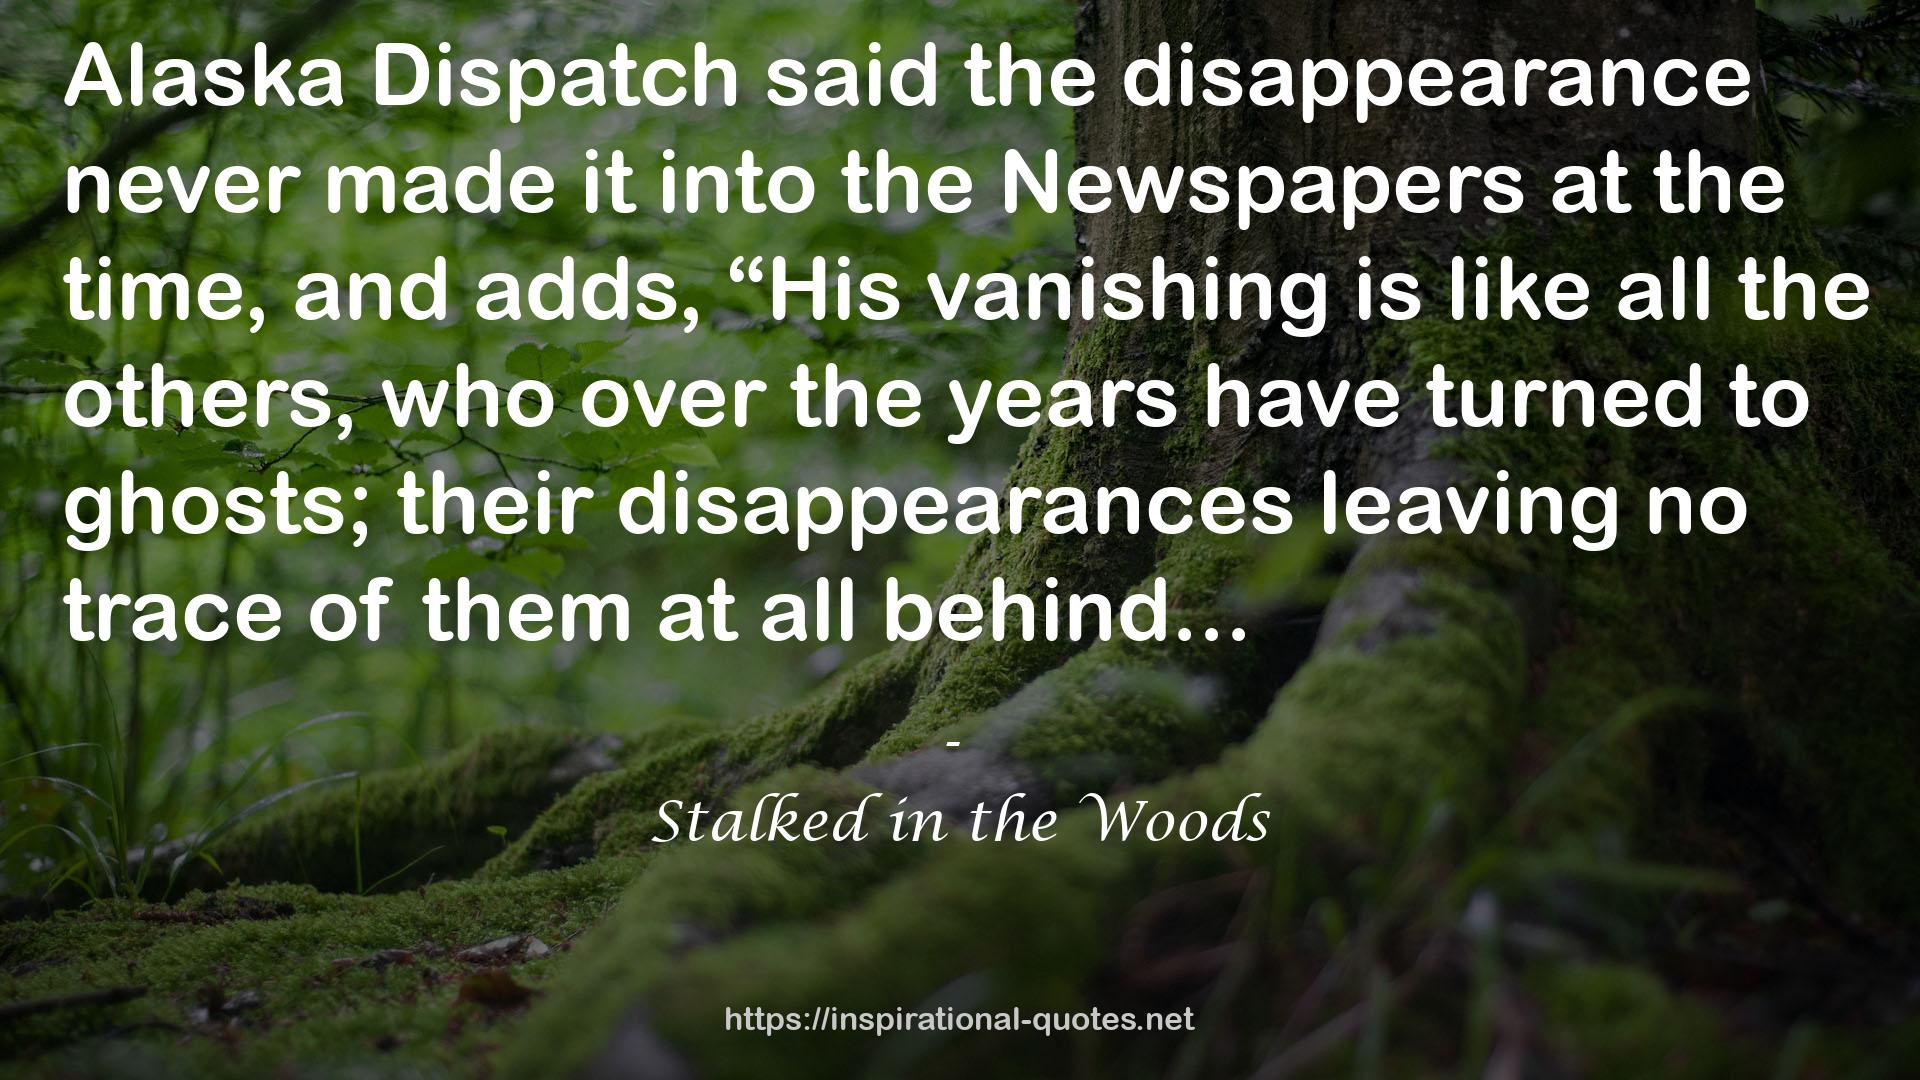 Stalked in the Woods QUOTES